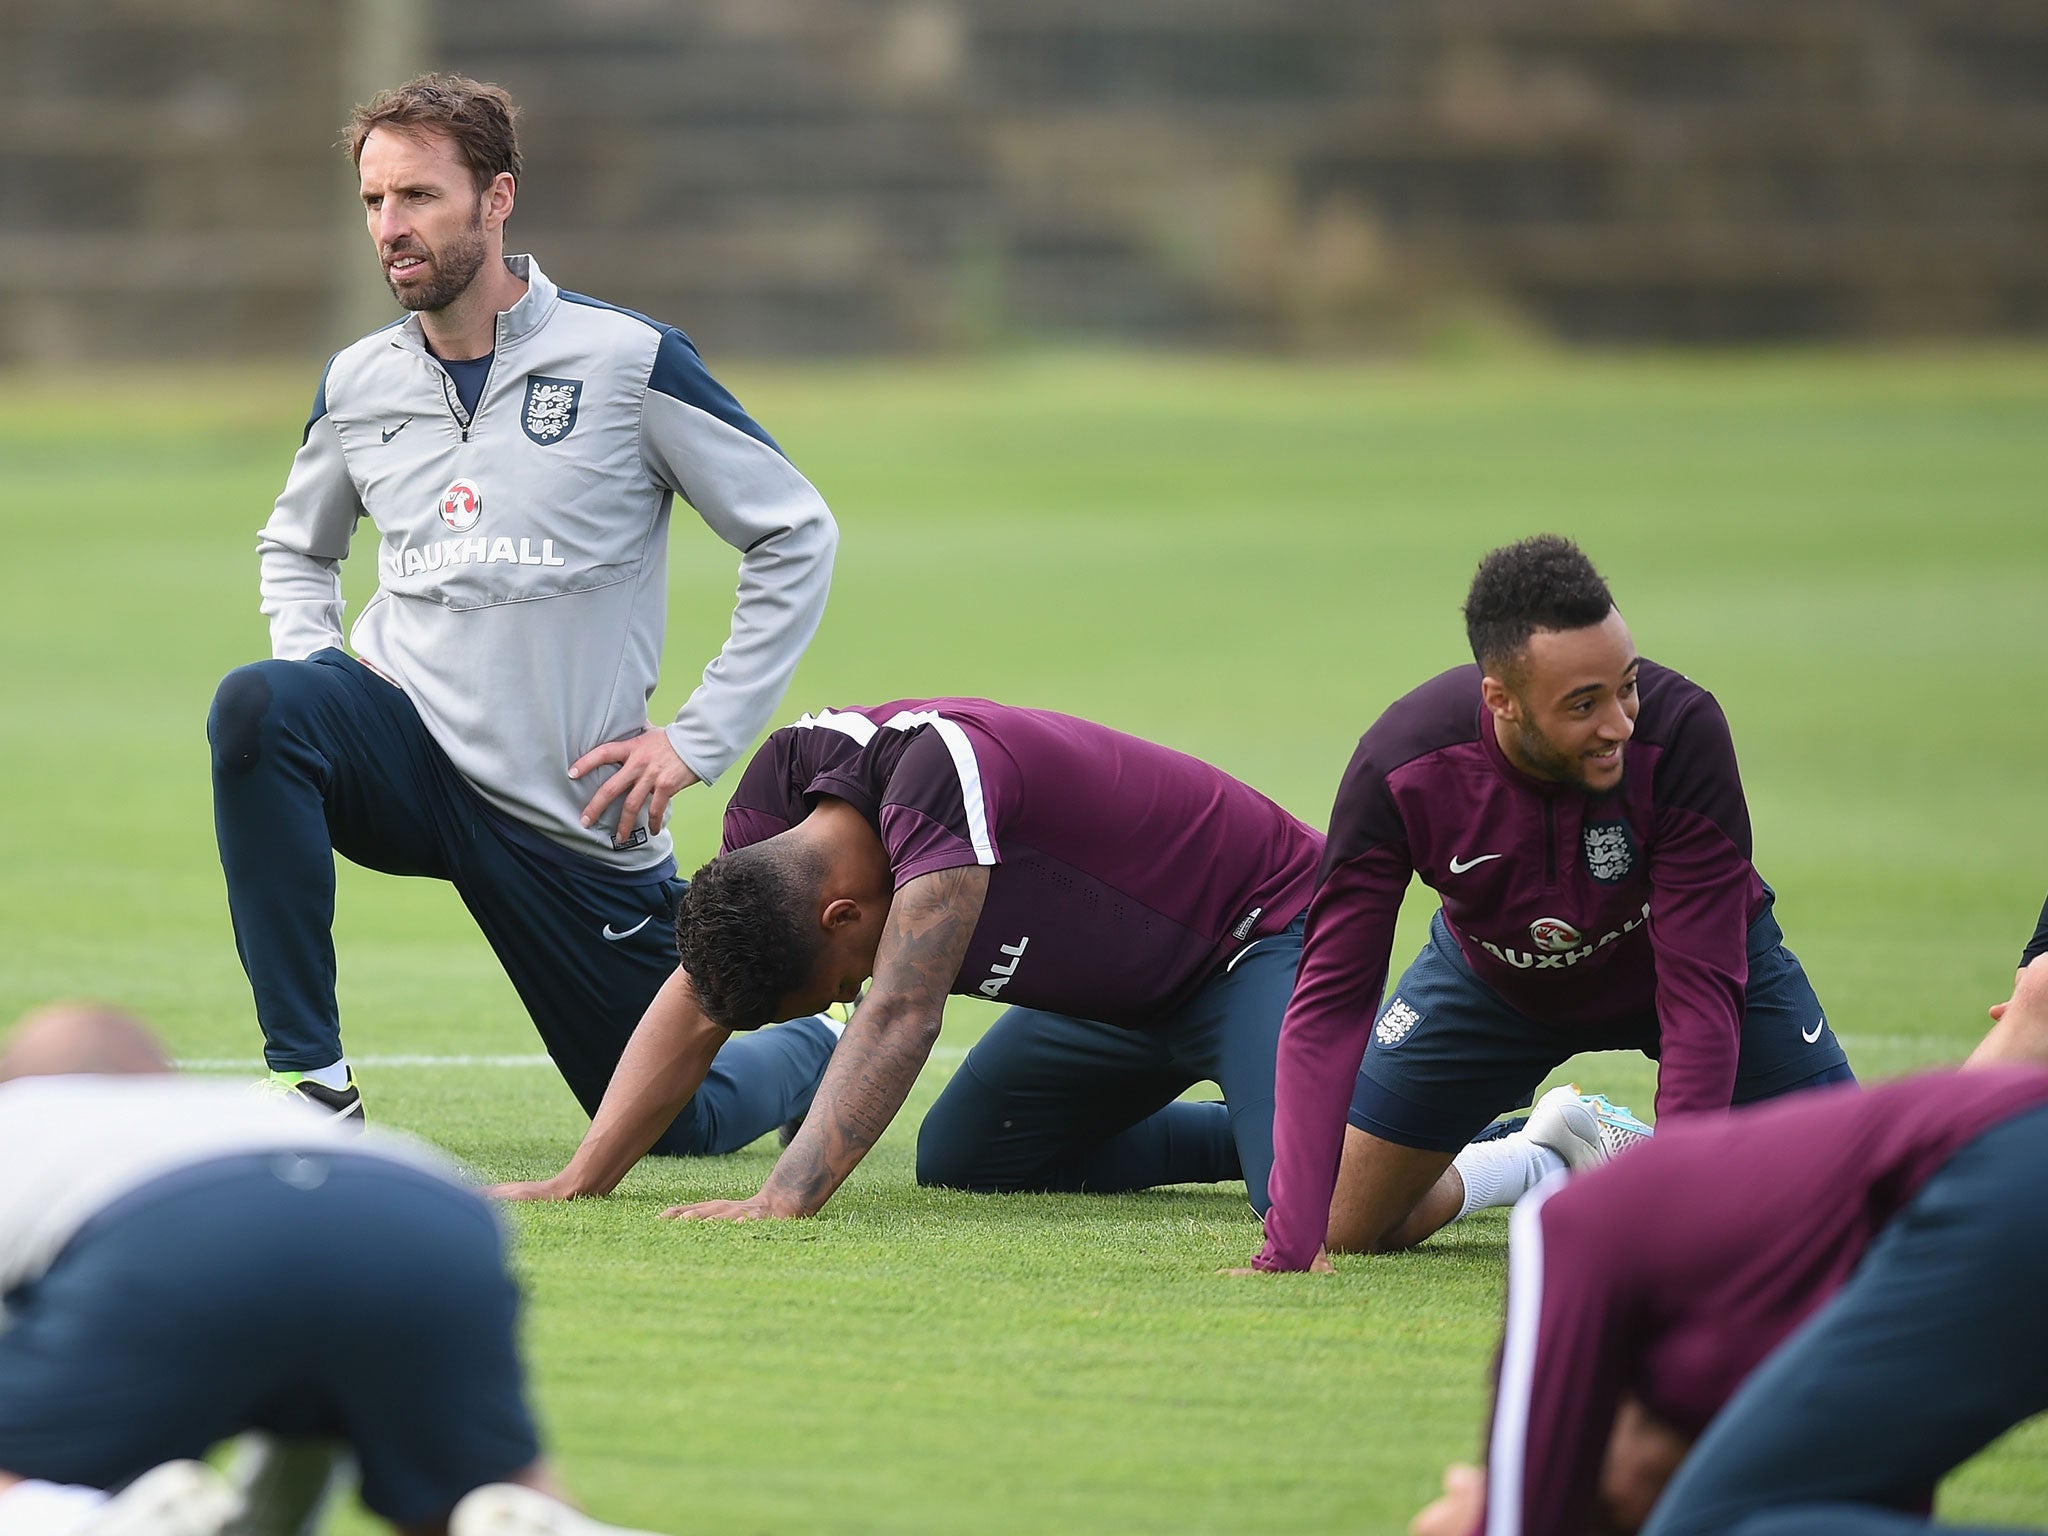 Gareth Southgate has denied that their is a racial divide among England's youth teams